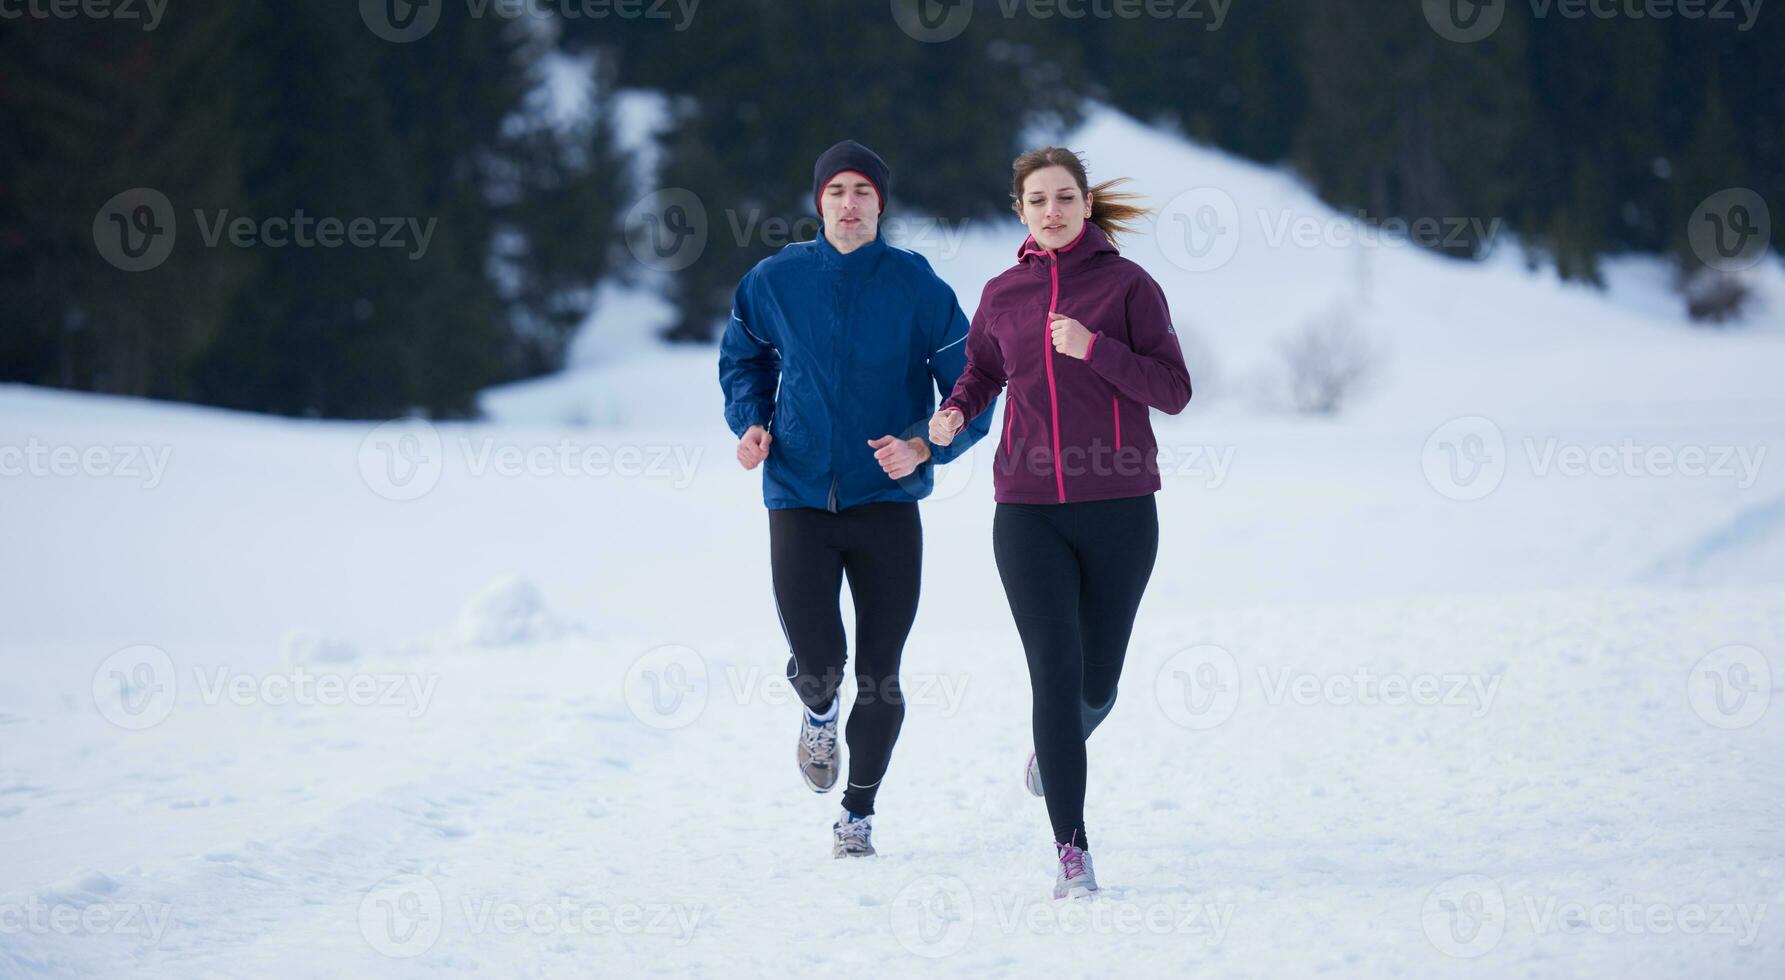 couple jogging outside on snow photo